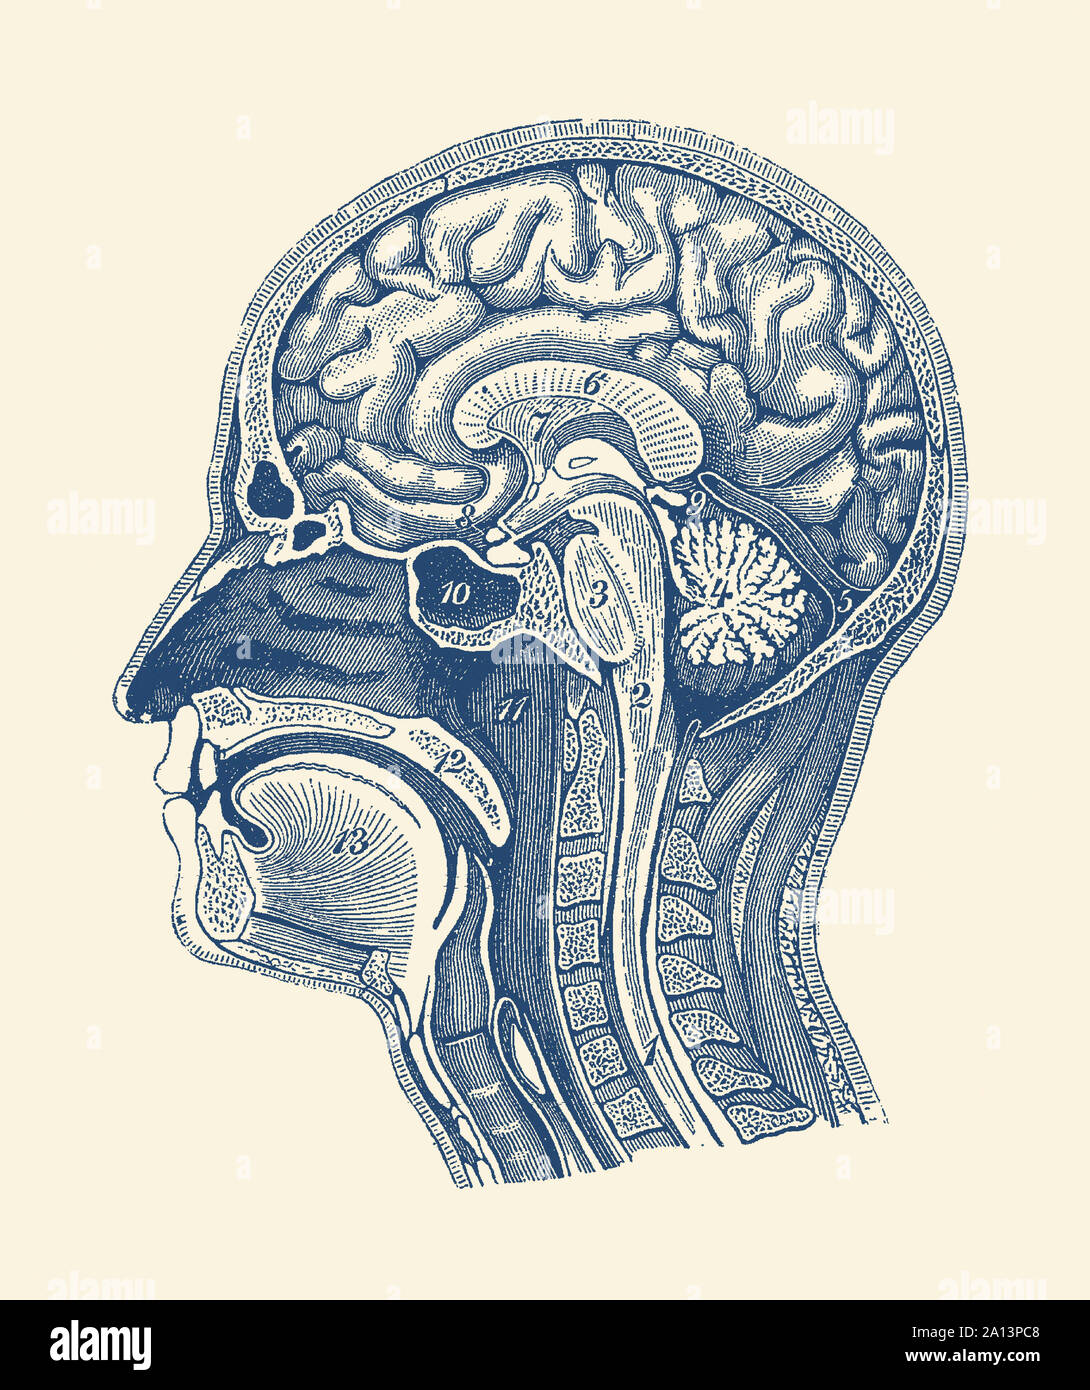 Diagram showcasing the arteries of the brain, spinal cord and facial anatomy. Stock Photo